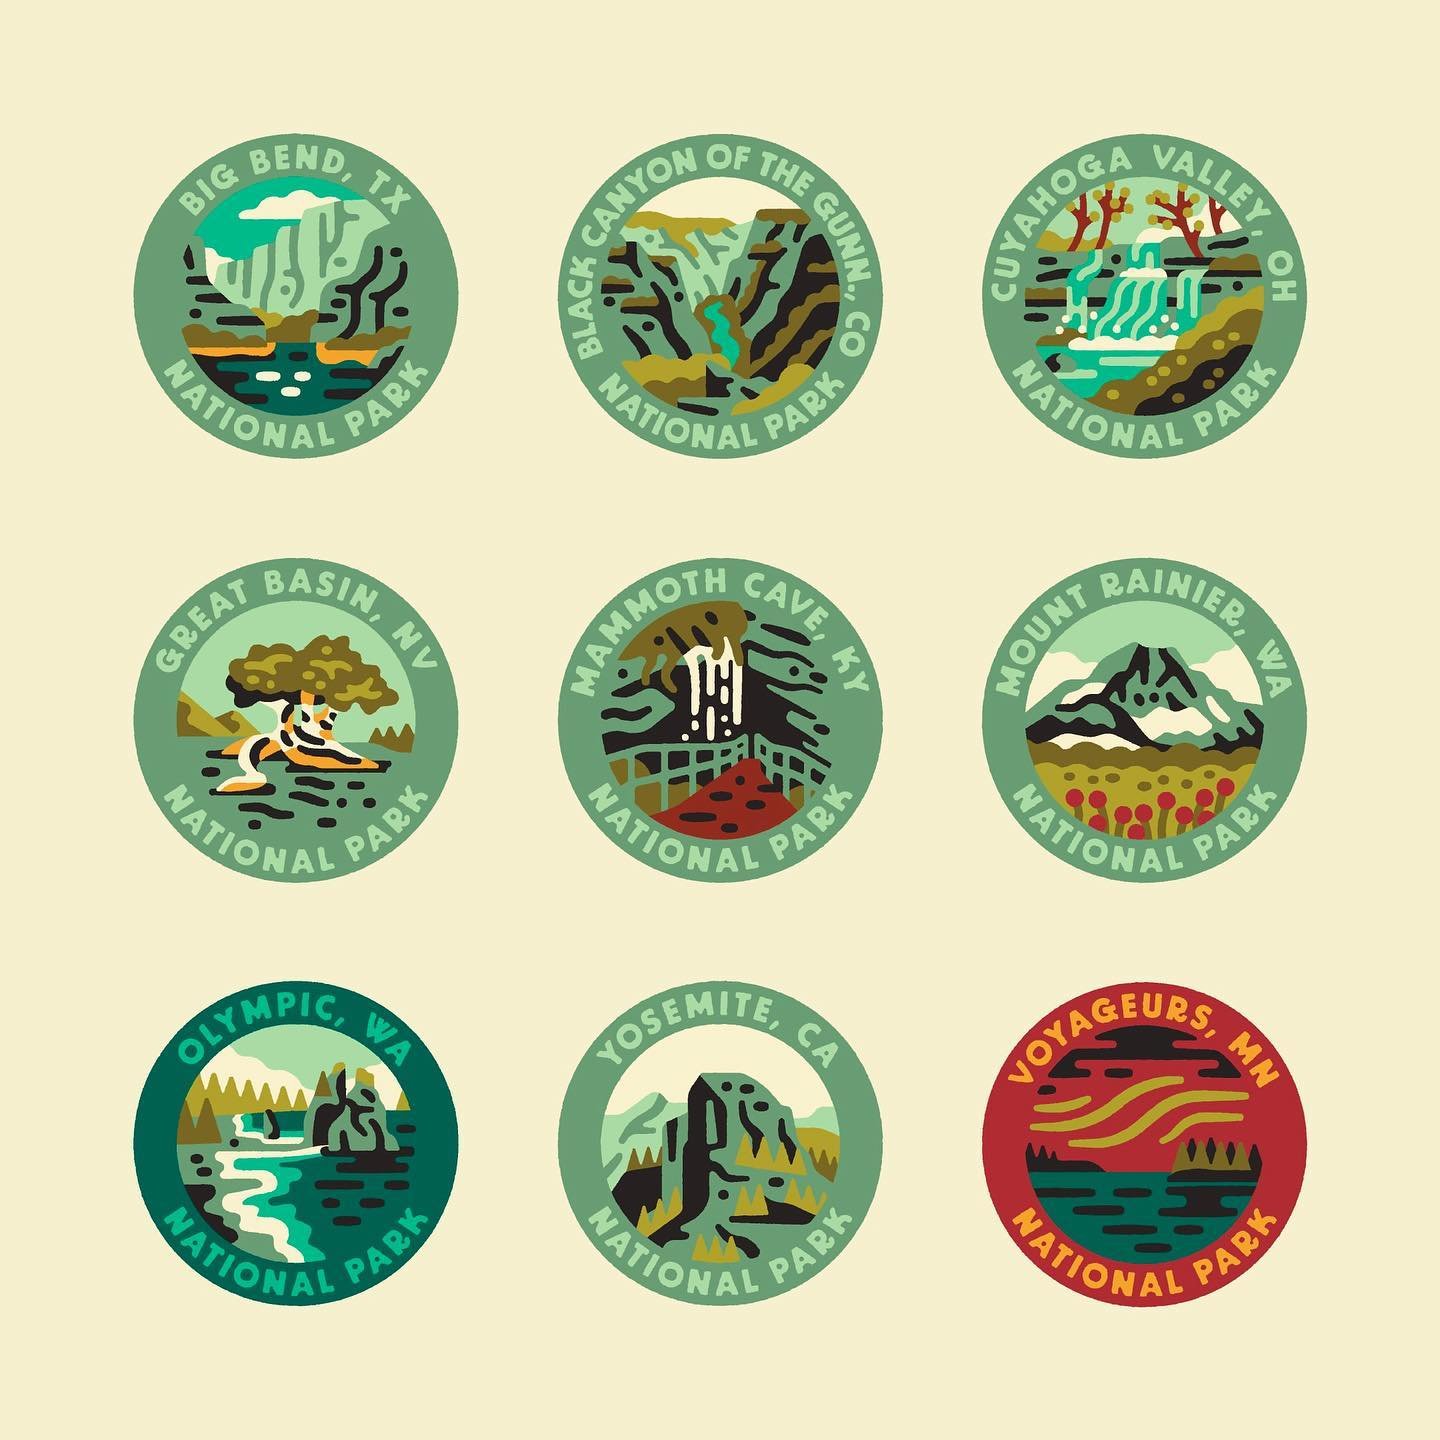 one last batch of stickers for @thegeoproject - what a doozy of a project!
.
.
.
.
.
#nationalpark #nationalparks #mountrainier #bigbend #yosemite #cuyahogavalleynationalpark #icondesign #vectordesign #vectorart #stickers